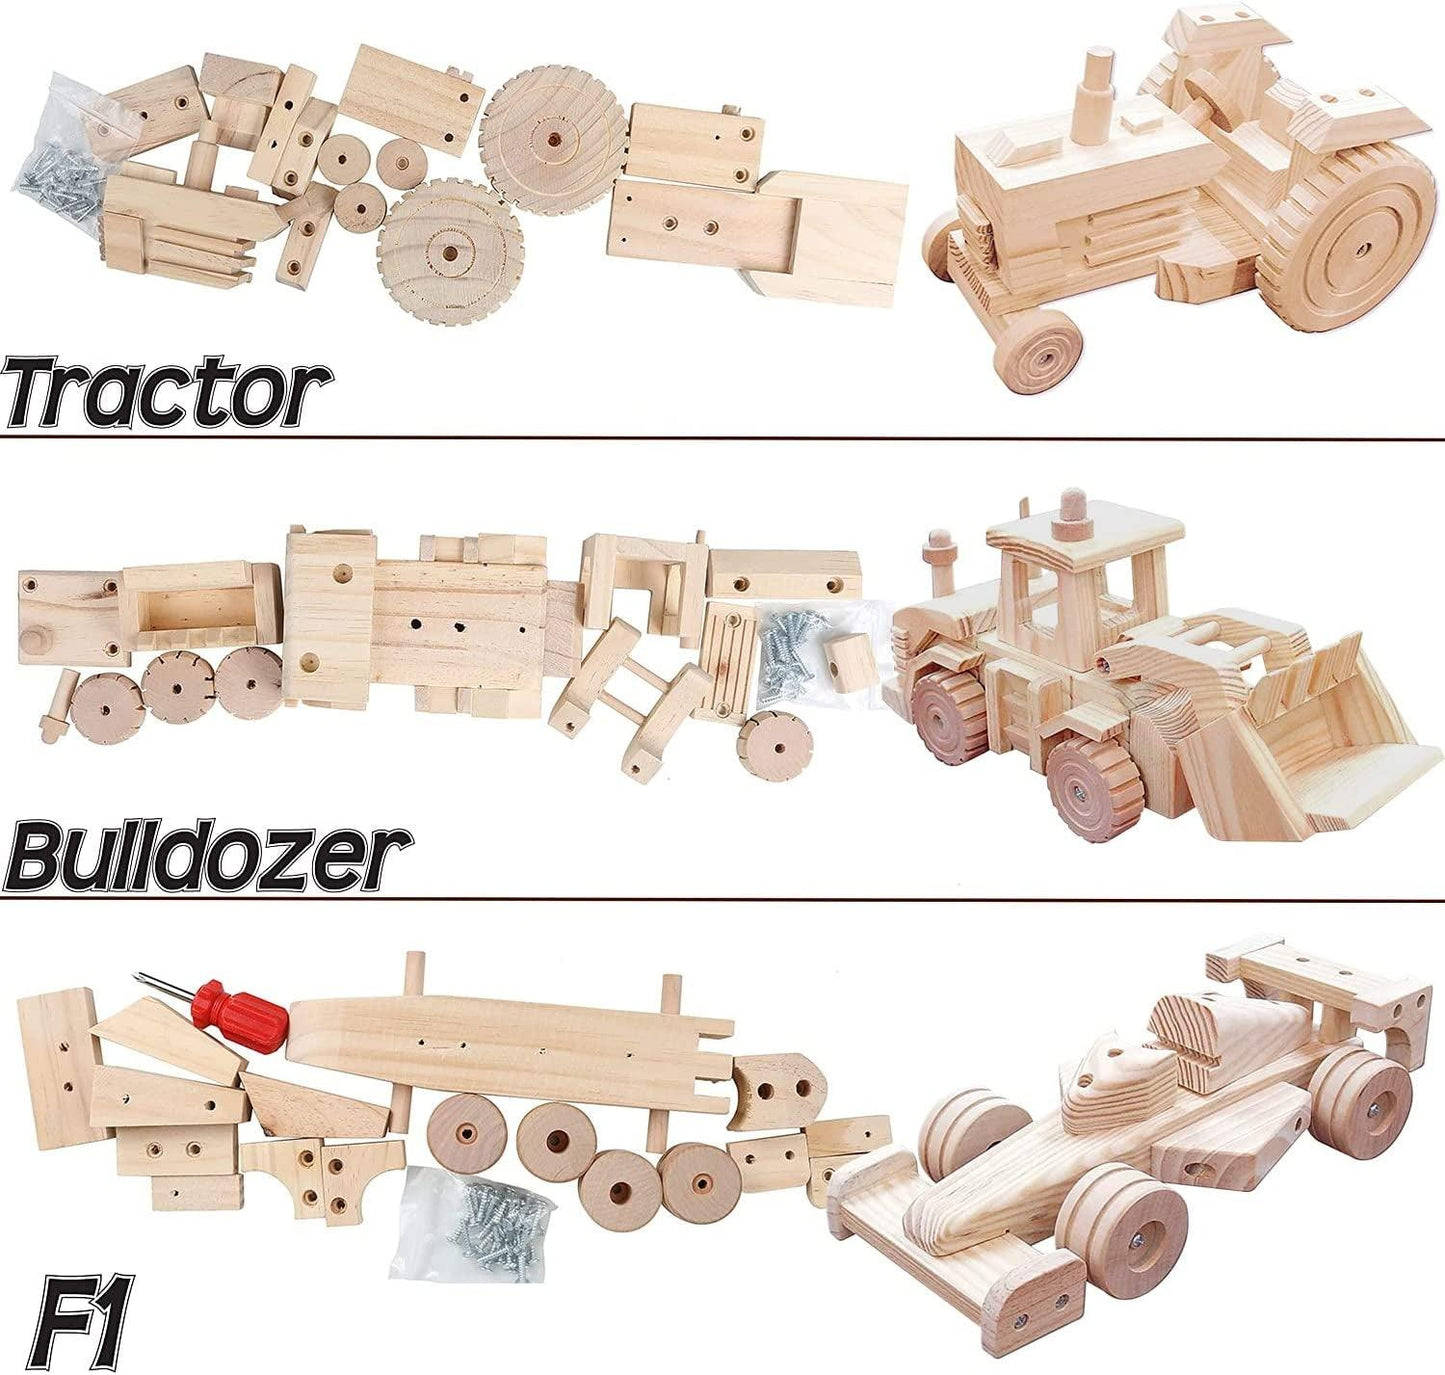 Woodworking Building Kit 3 Educational DIY Carpentry Construction Wood Kit Toy Tractor, Bulldozer and F1 - WoodArtSupply